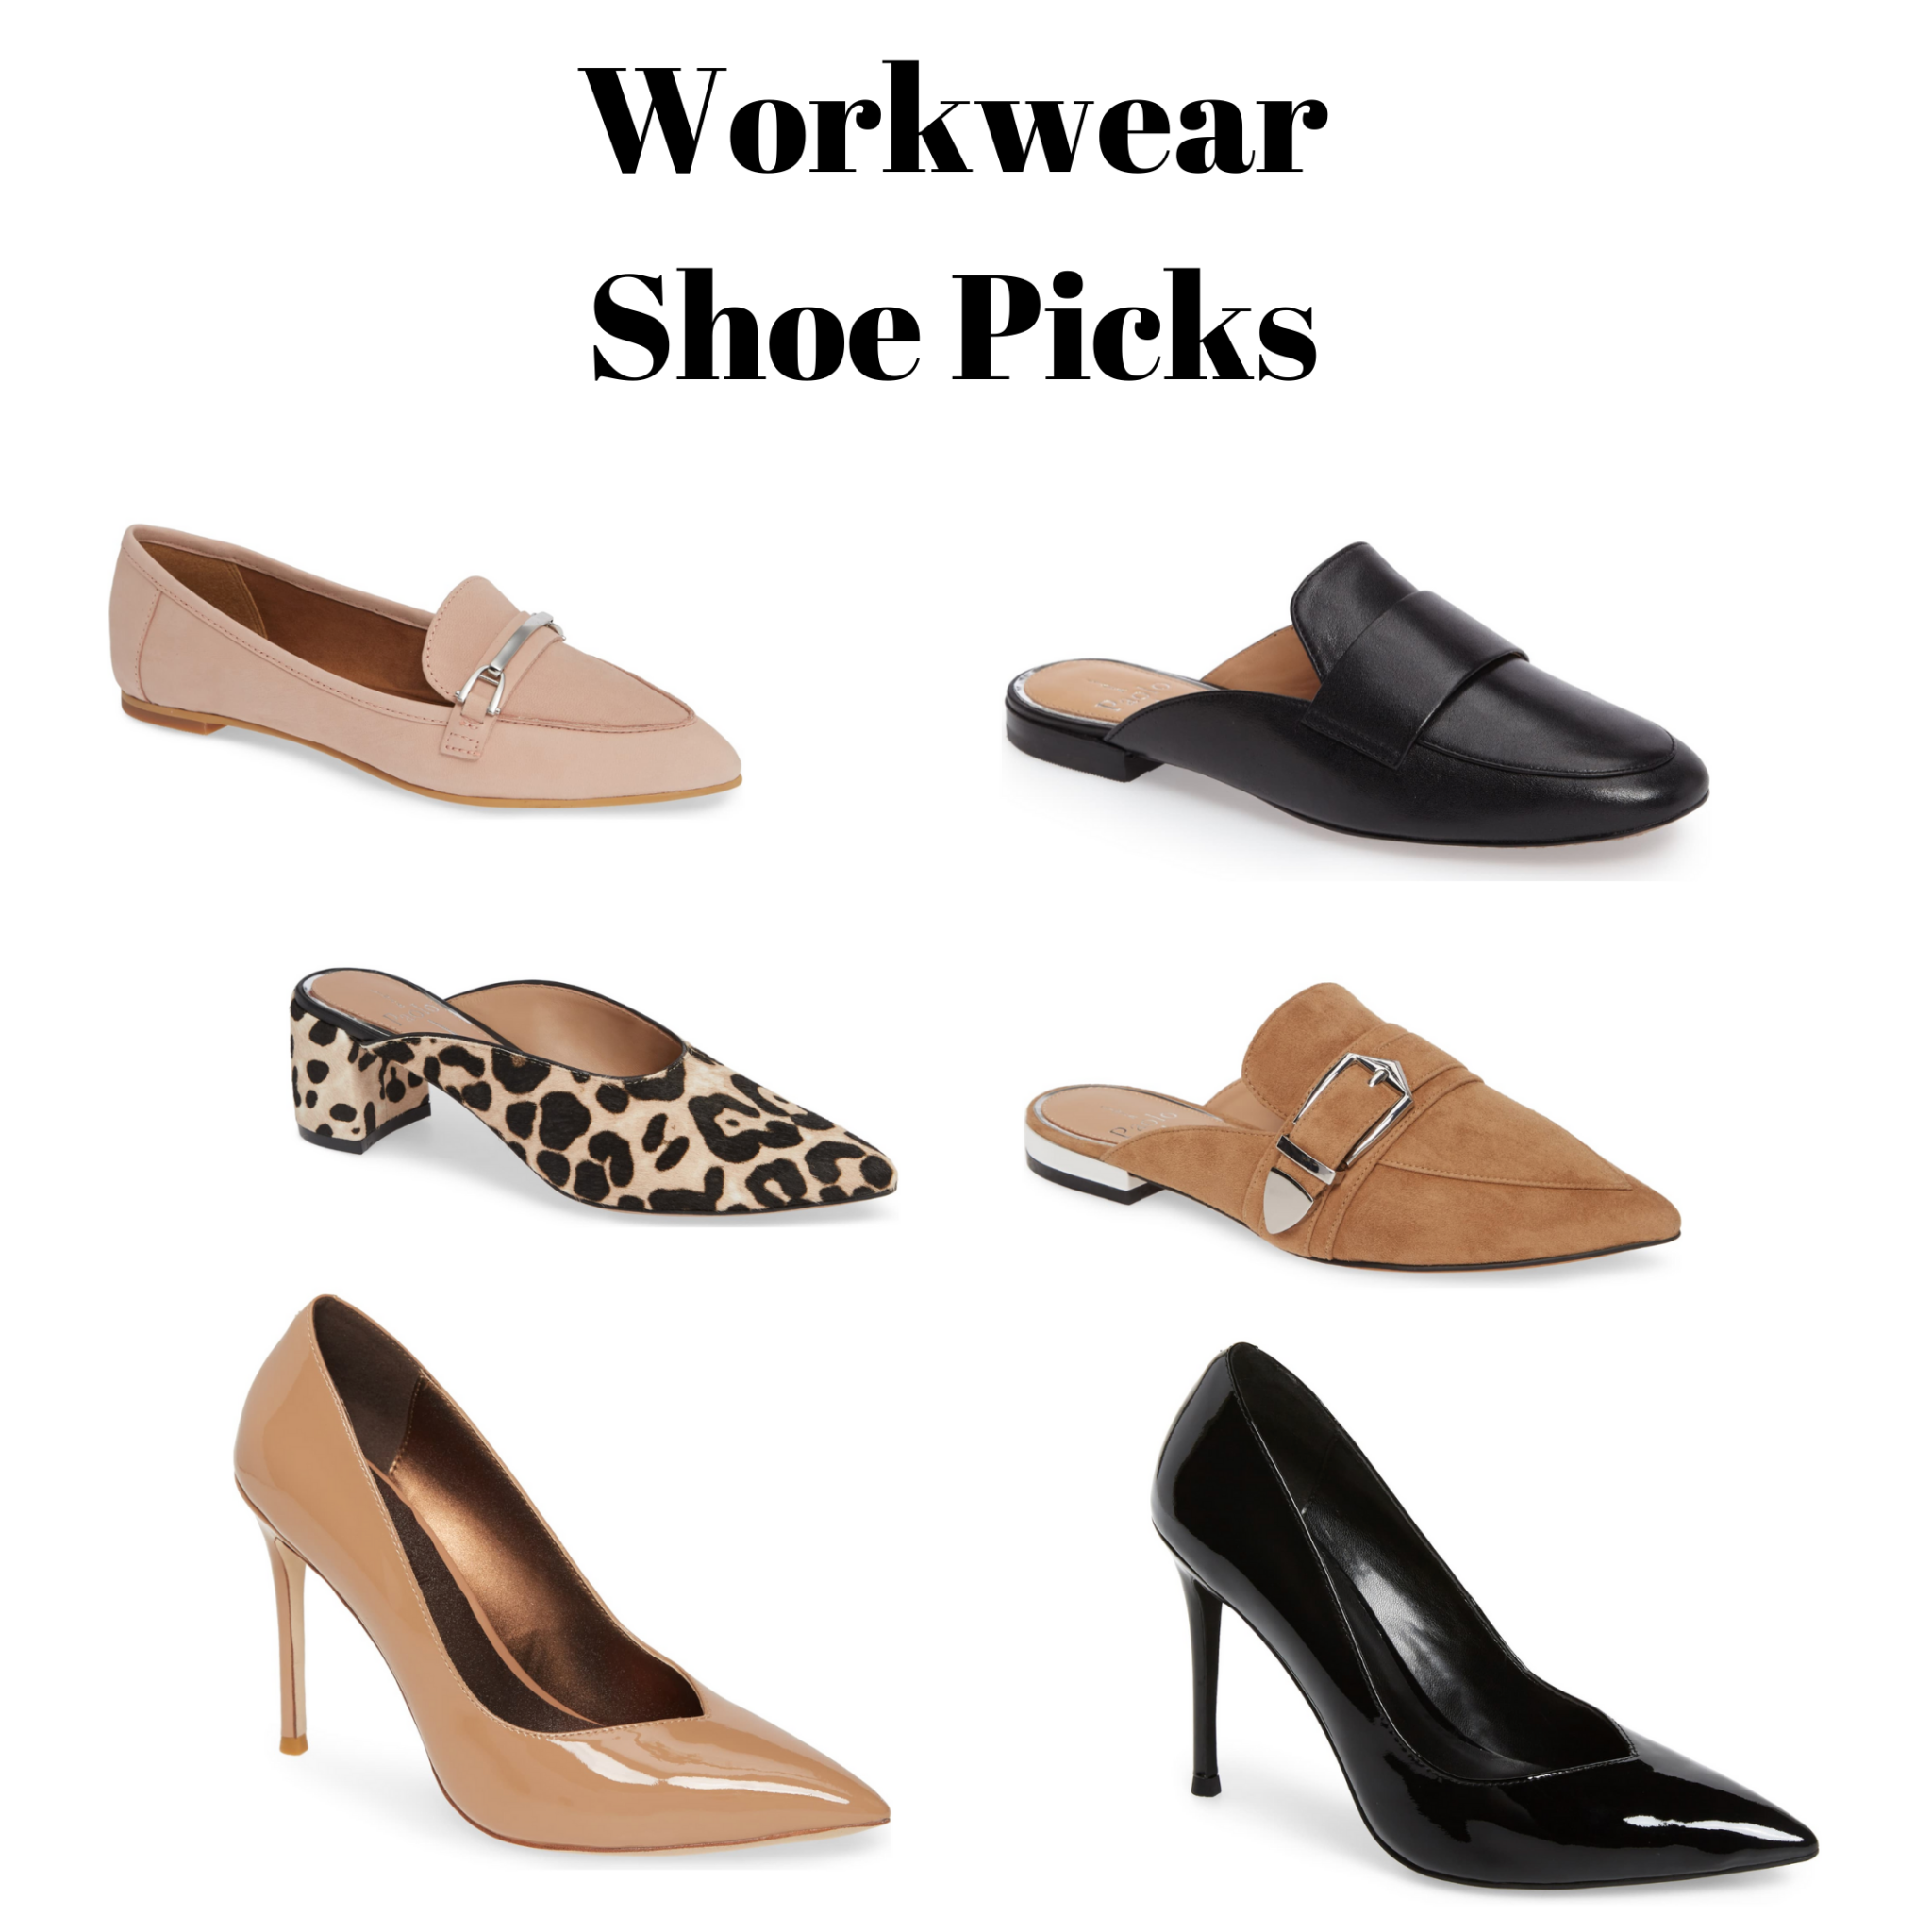 Workwear shoes